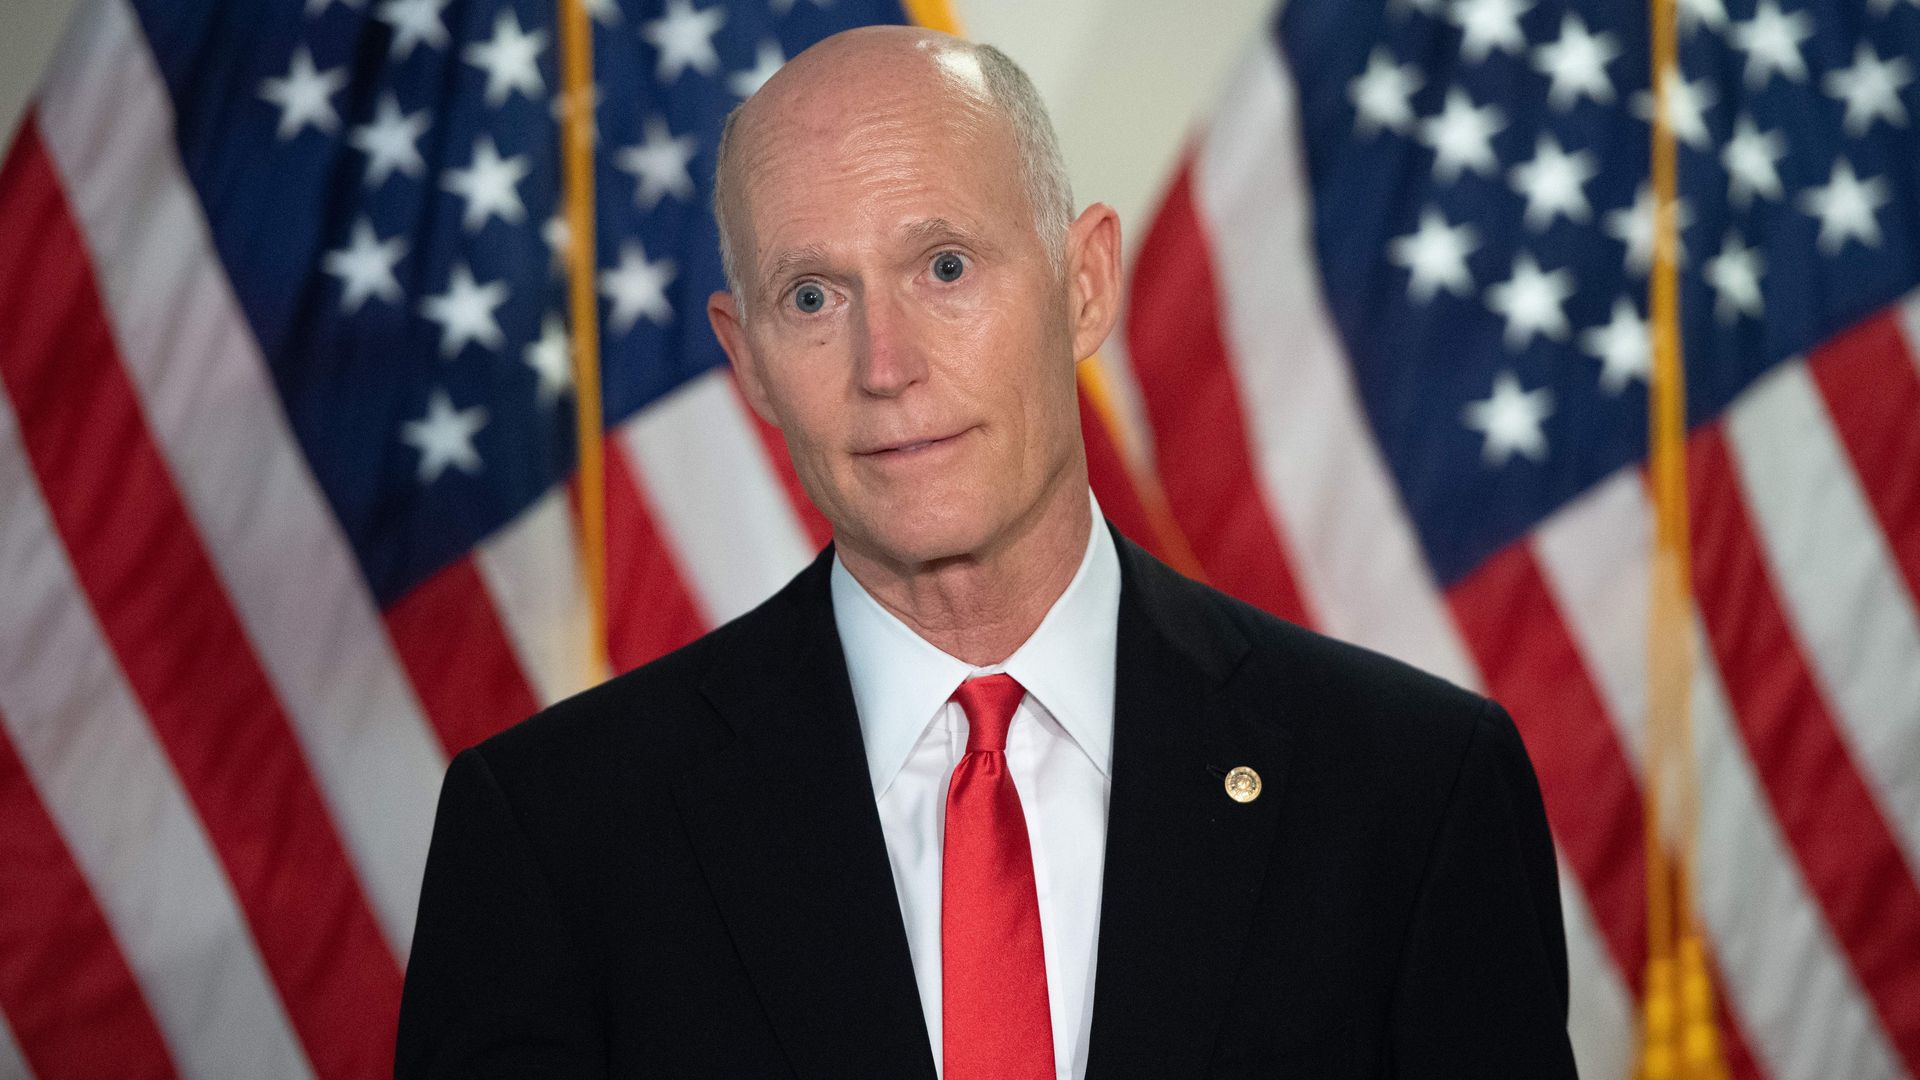 Rick Scott is seen during a news conference.